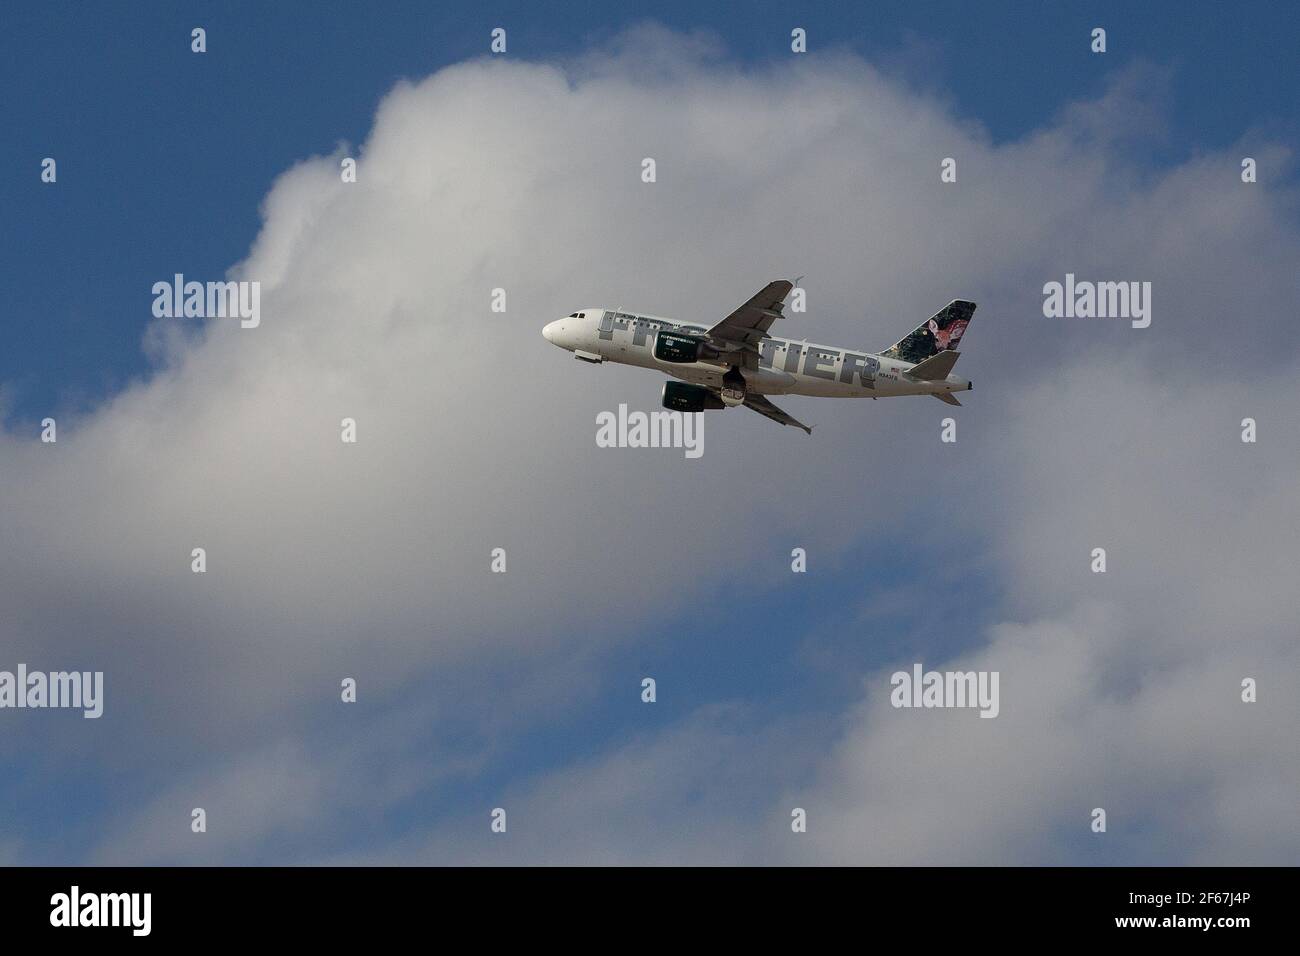 Frontier Airlines plane taking off from Denver International Airport Denver Colorado. DIA Stock Photo